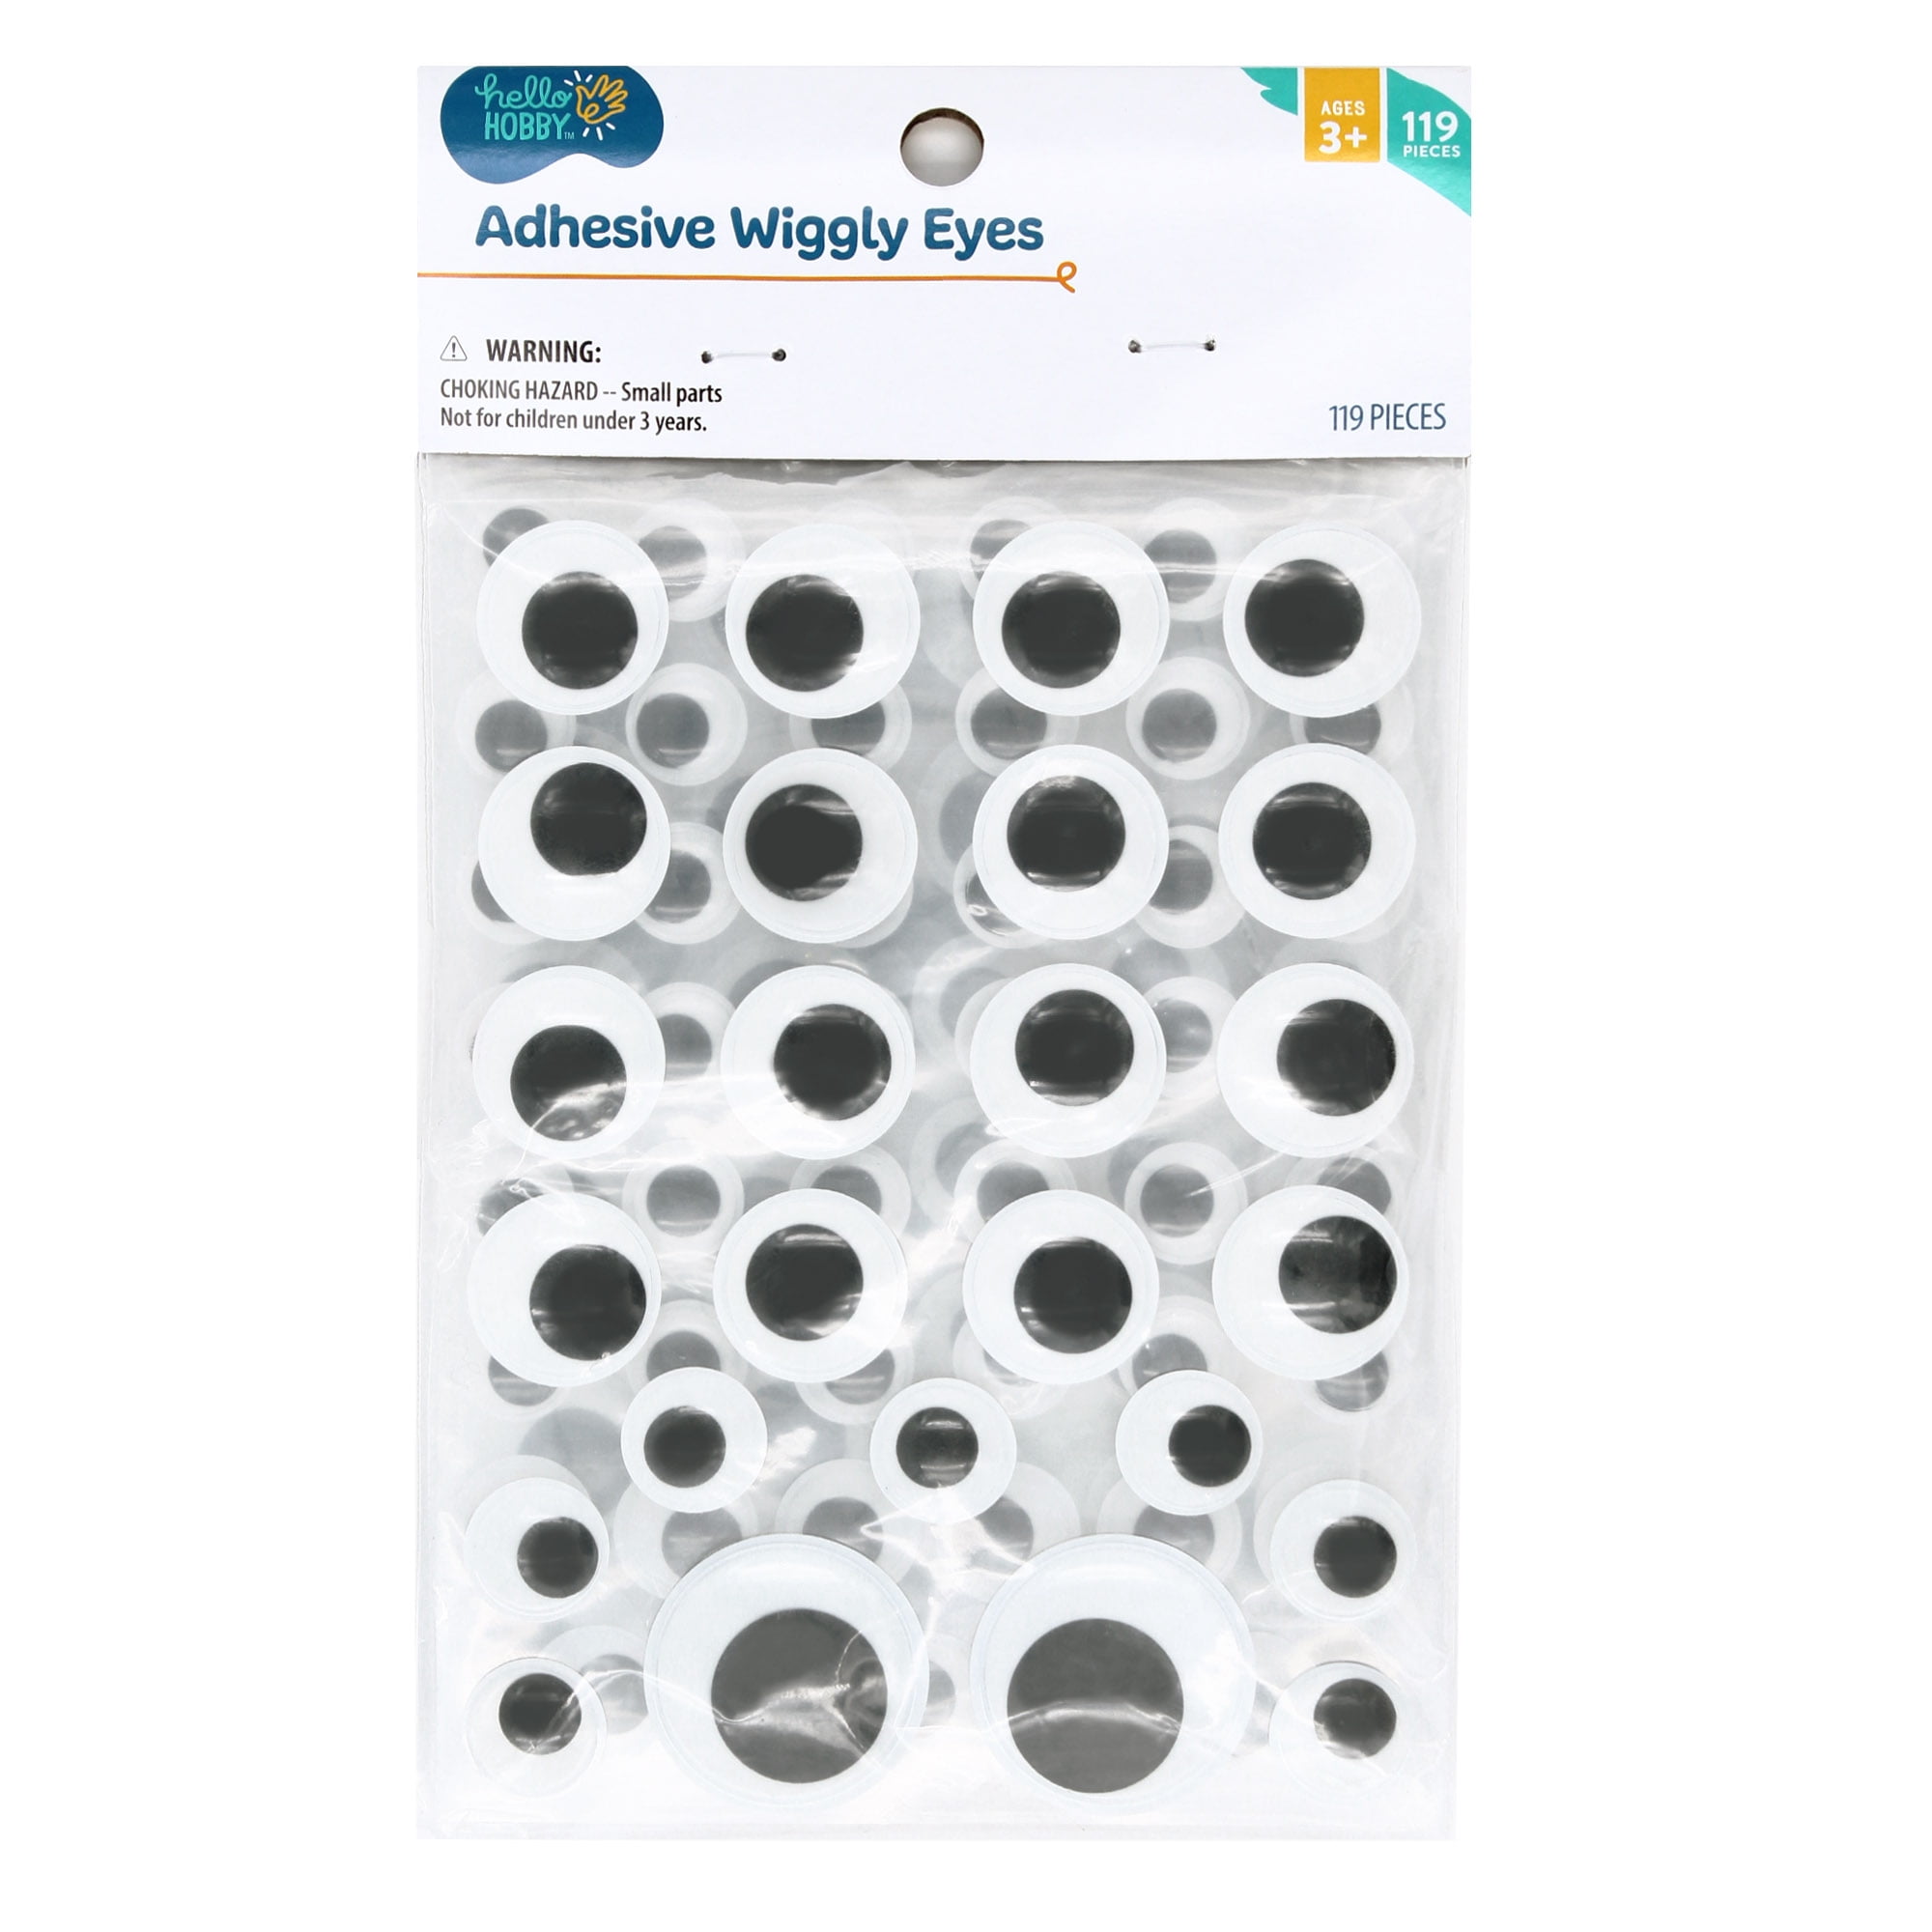 75 Pack Adhesive Wiggly Eyes